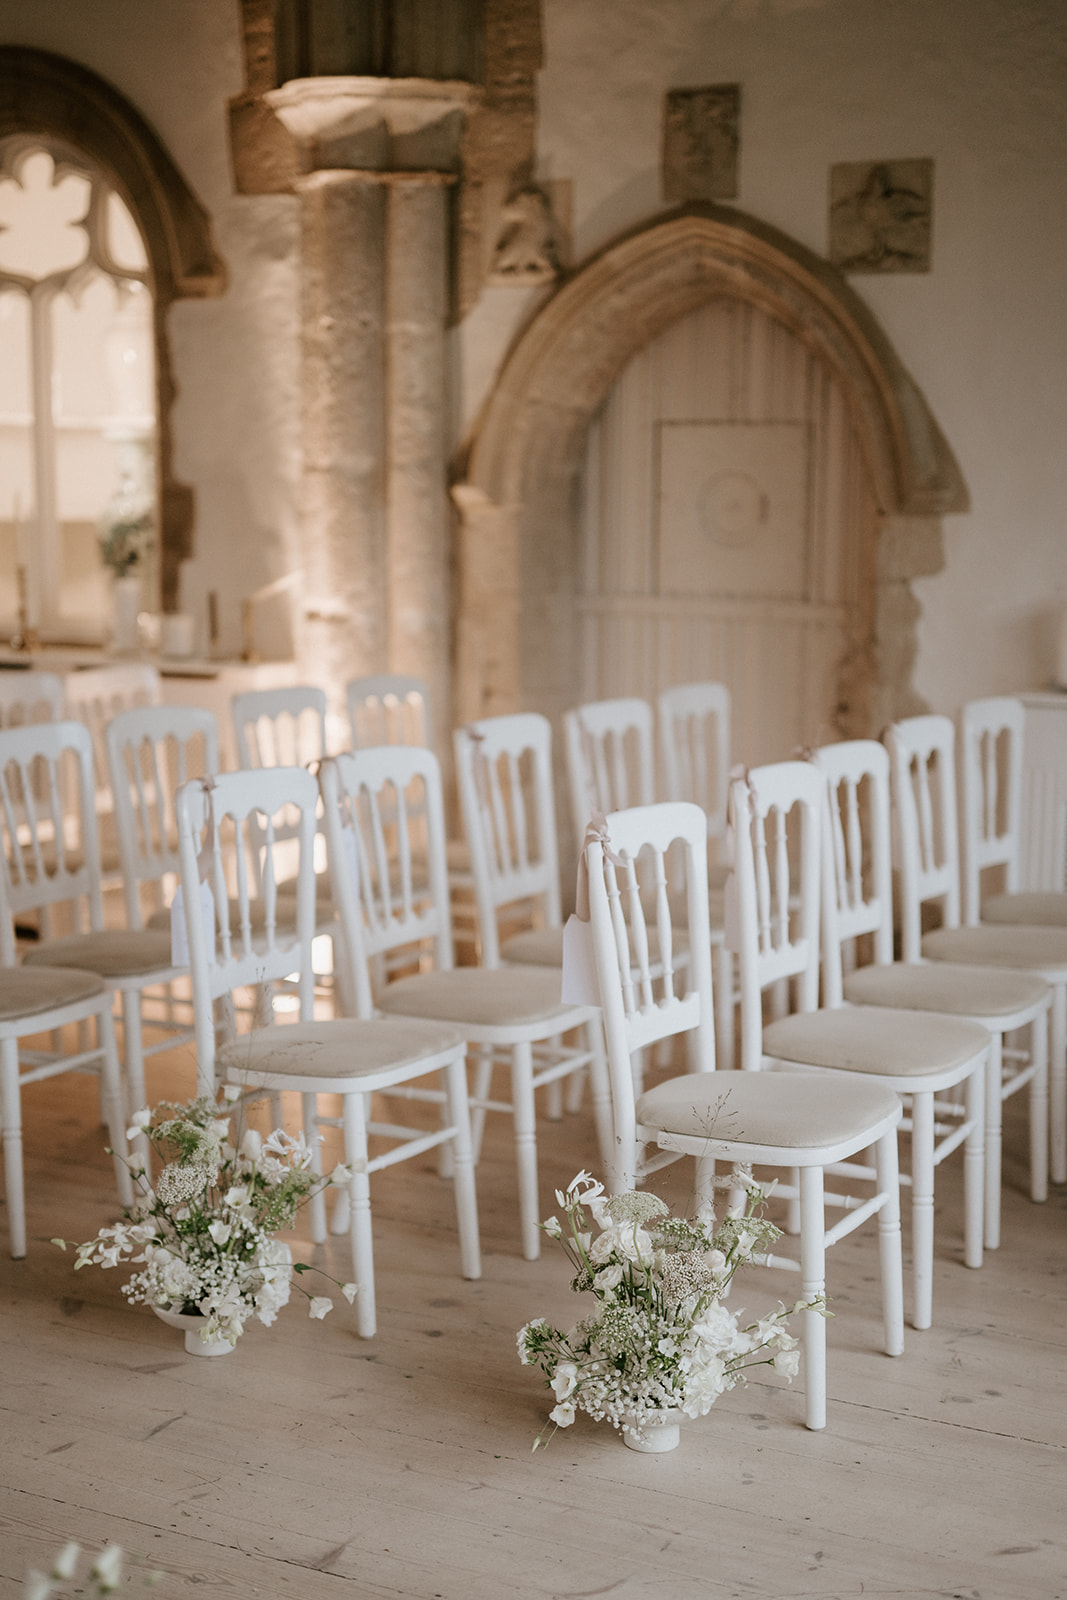 ceremony in great hall at butley priory wedding venue